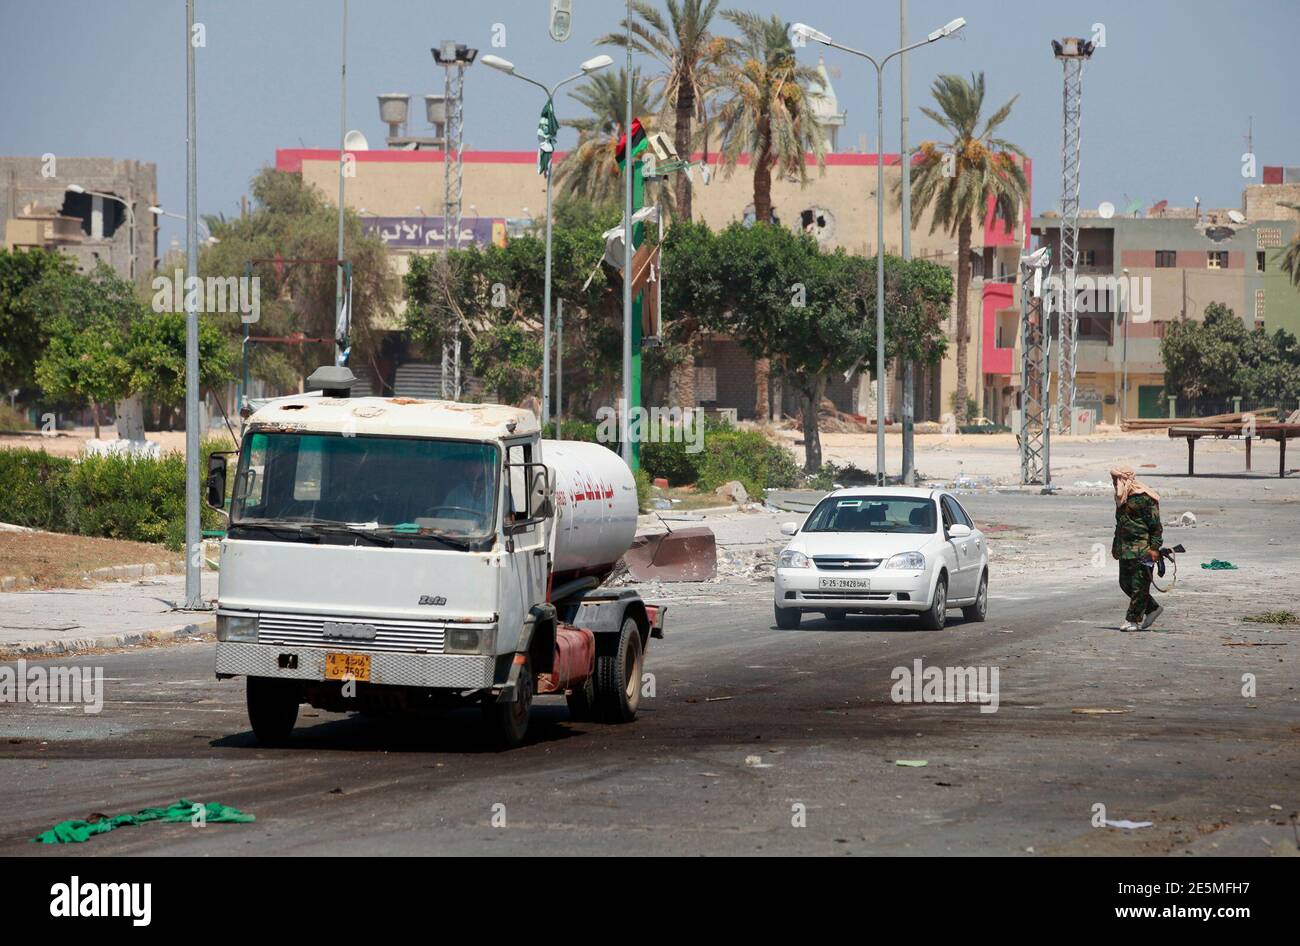 A Libyan rebel fighter directs traffic in the main square after rebels sized control of the center of the strategic coastal city of Zawiyah, August 20, 2011.   REUTERS/Bob Strong  (LIBYA - Tags: CIVIL UNREST POLITICS) Stock Photo